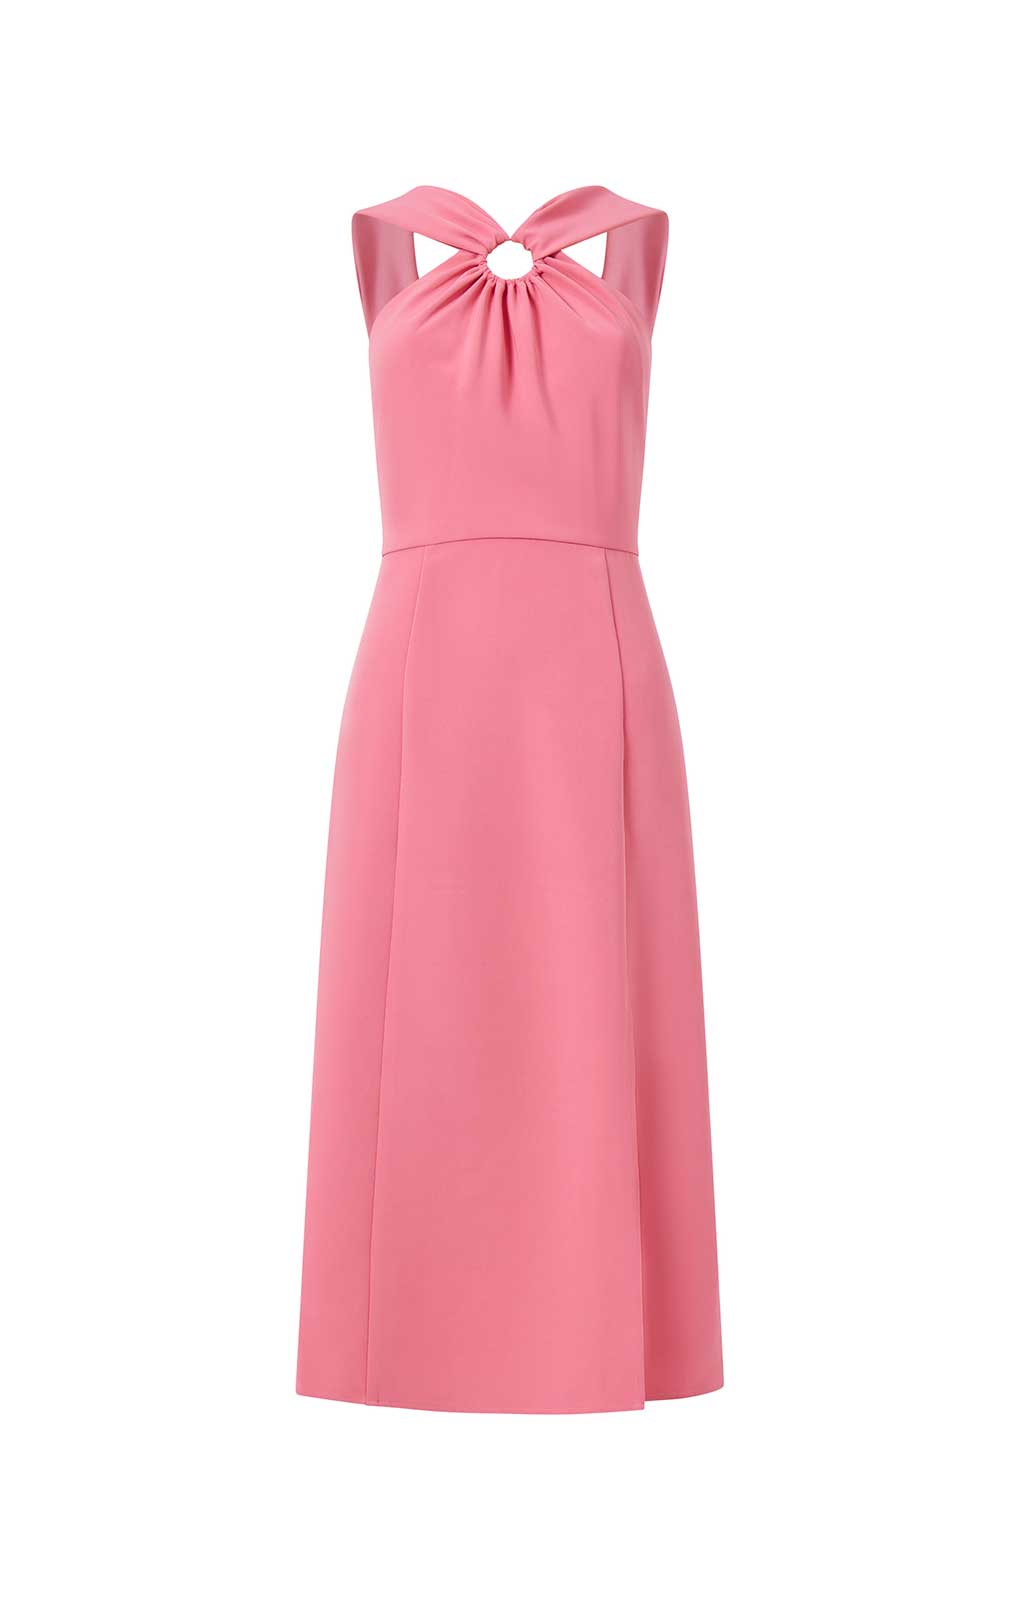 French Connection Eco Crepe Ring Halterneck Dress in Pink product image